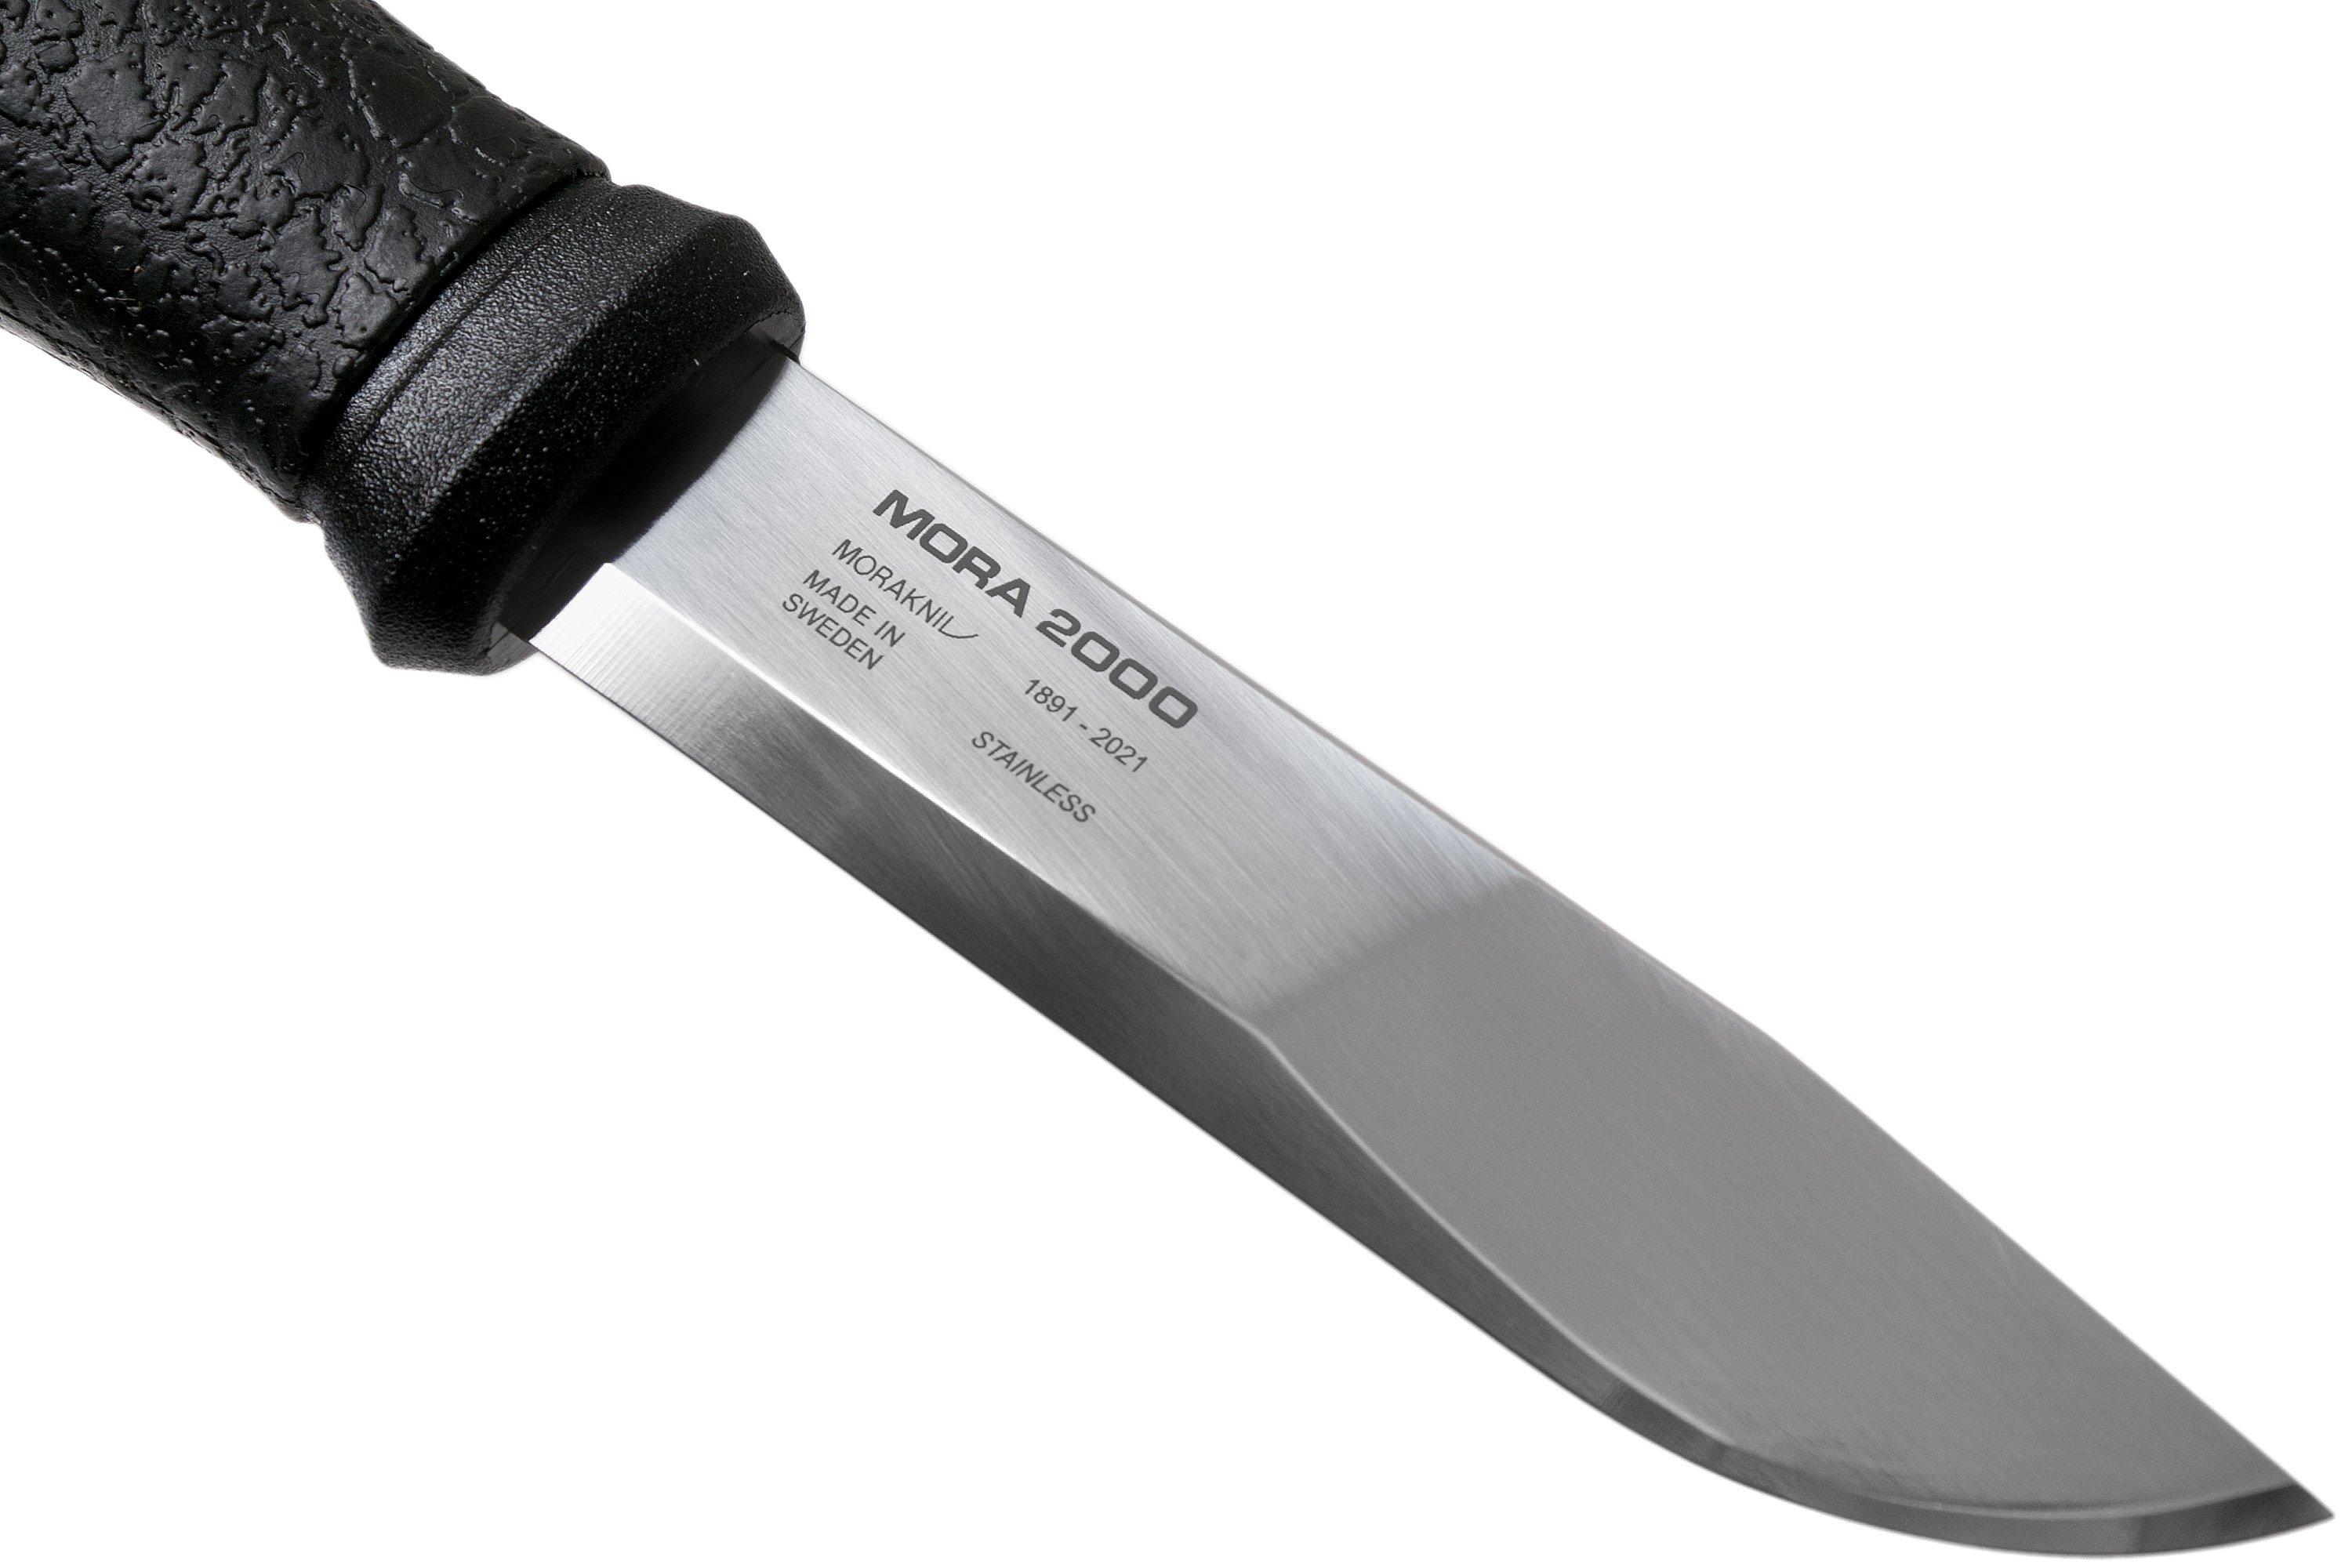 Anniversary Edition Morakniv Knife Review: The Mora 2000 (S) - Wide Open  Spaces